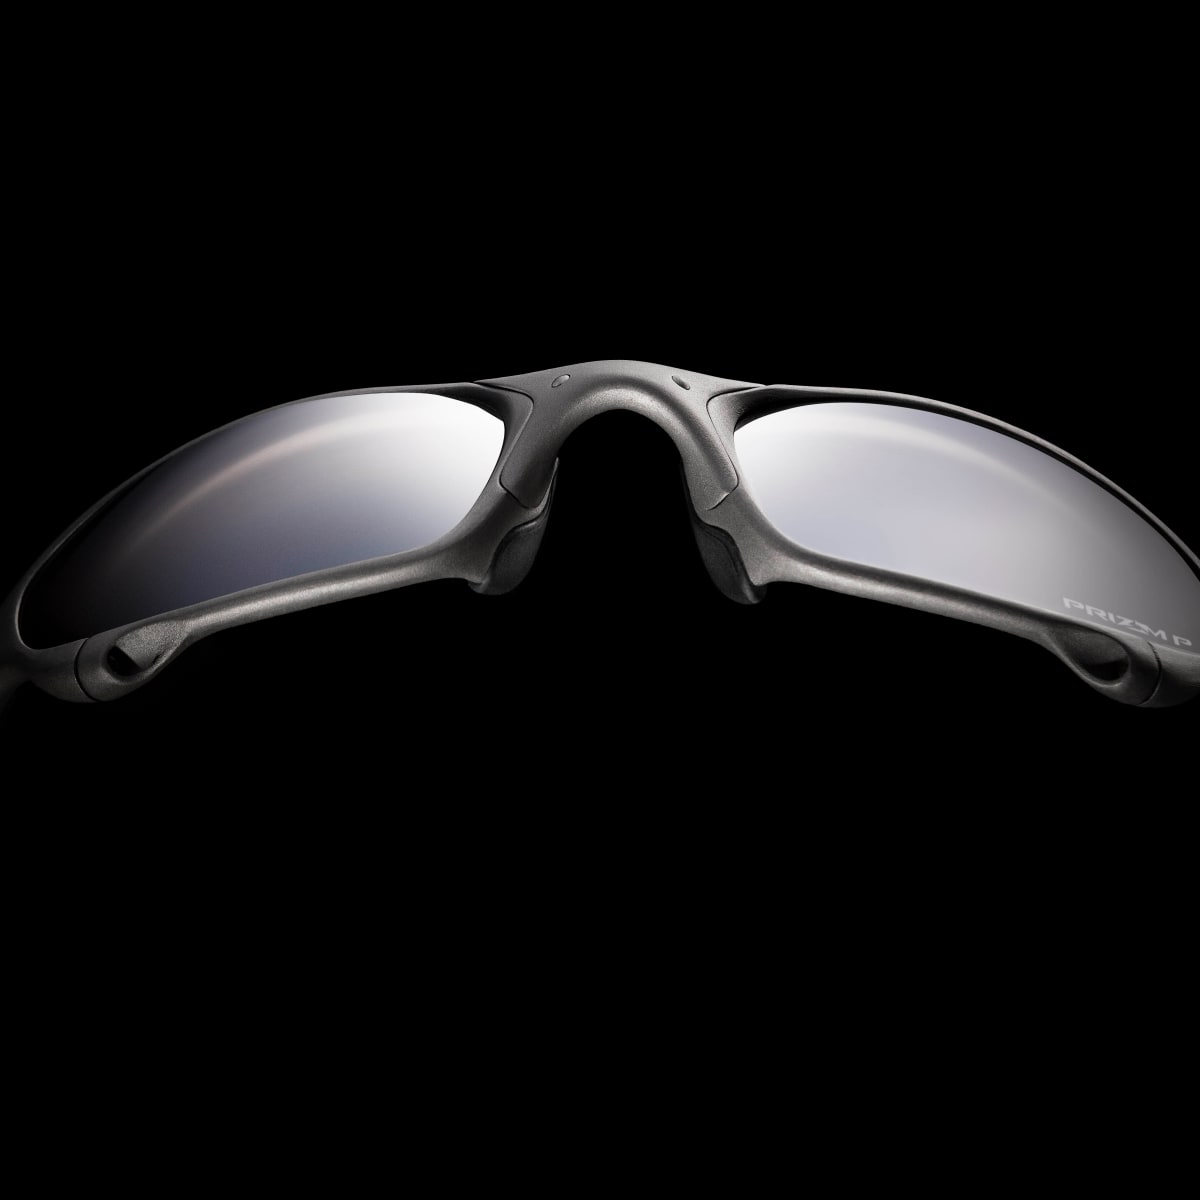 Sprout Zoom ind tuberkulose Oakley brings back its iconic X Metal frames in a new limited edition -  Acquire